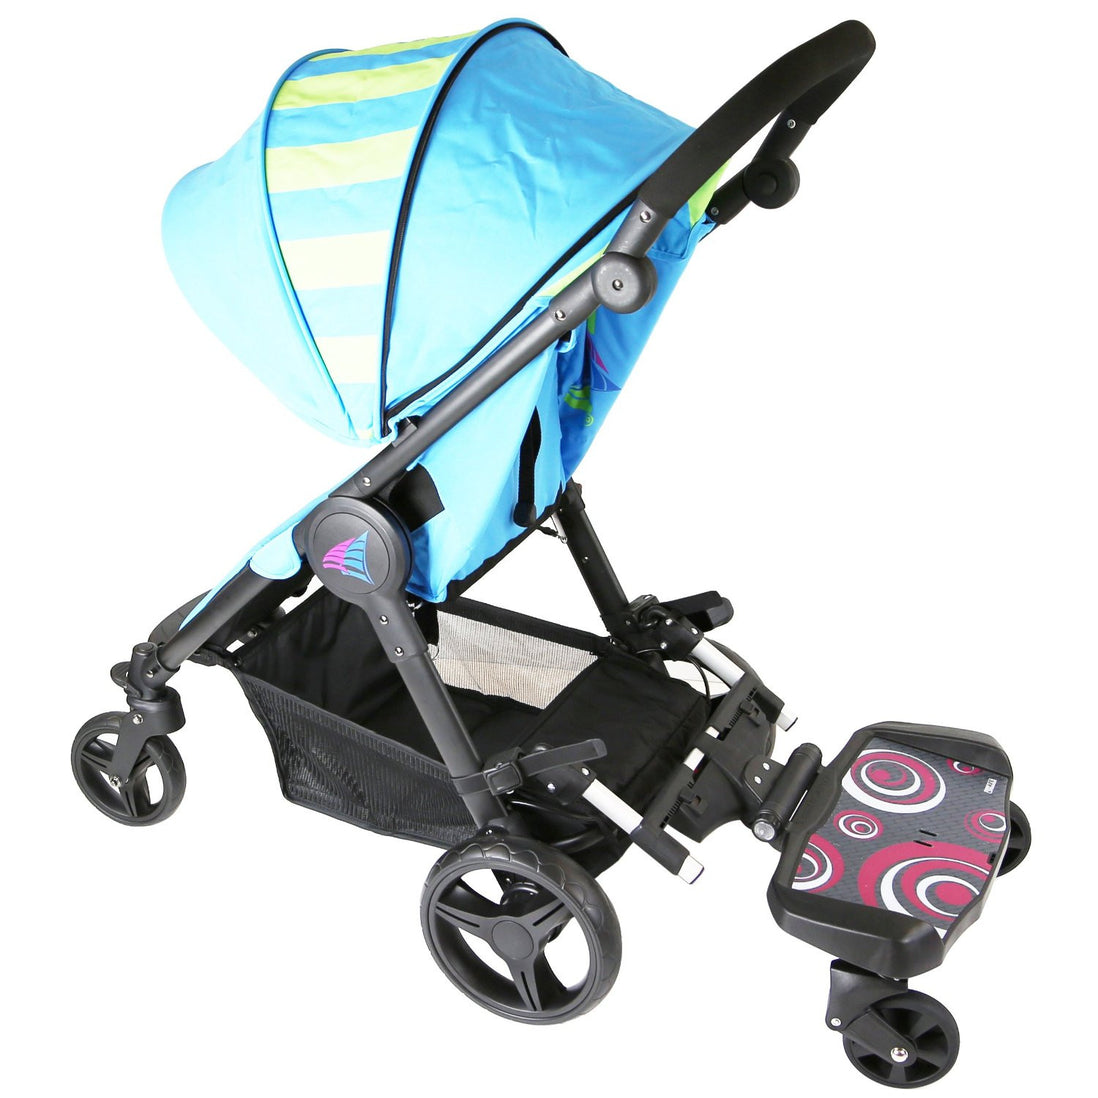 buggy board for pushchair